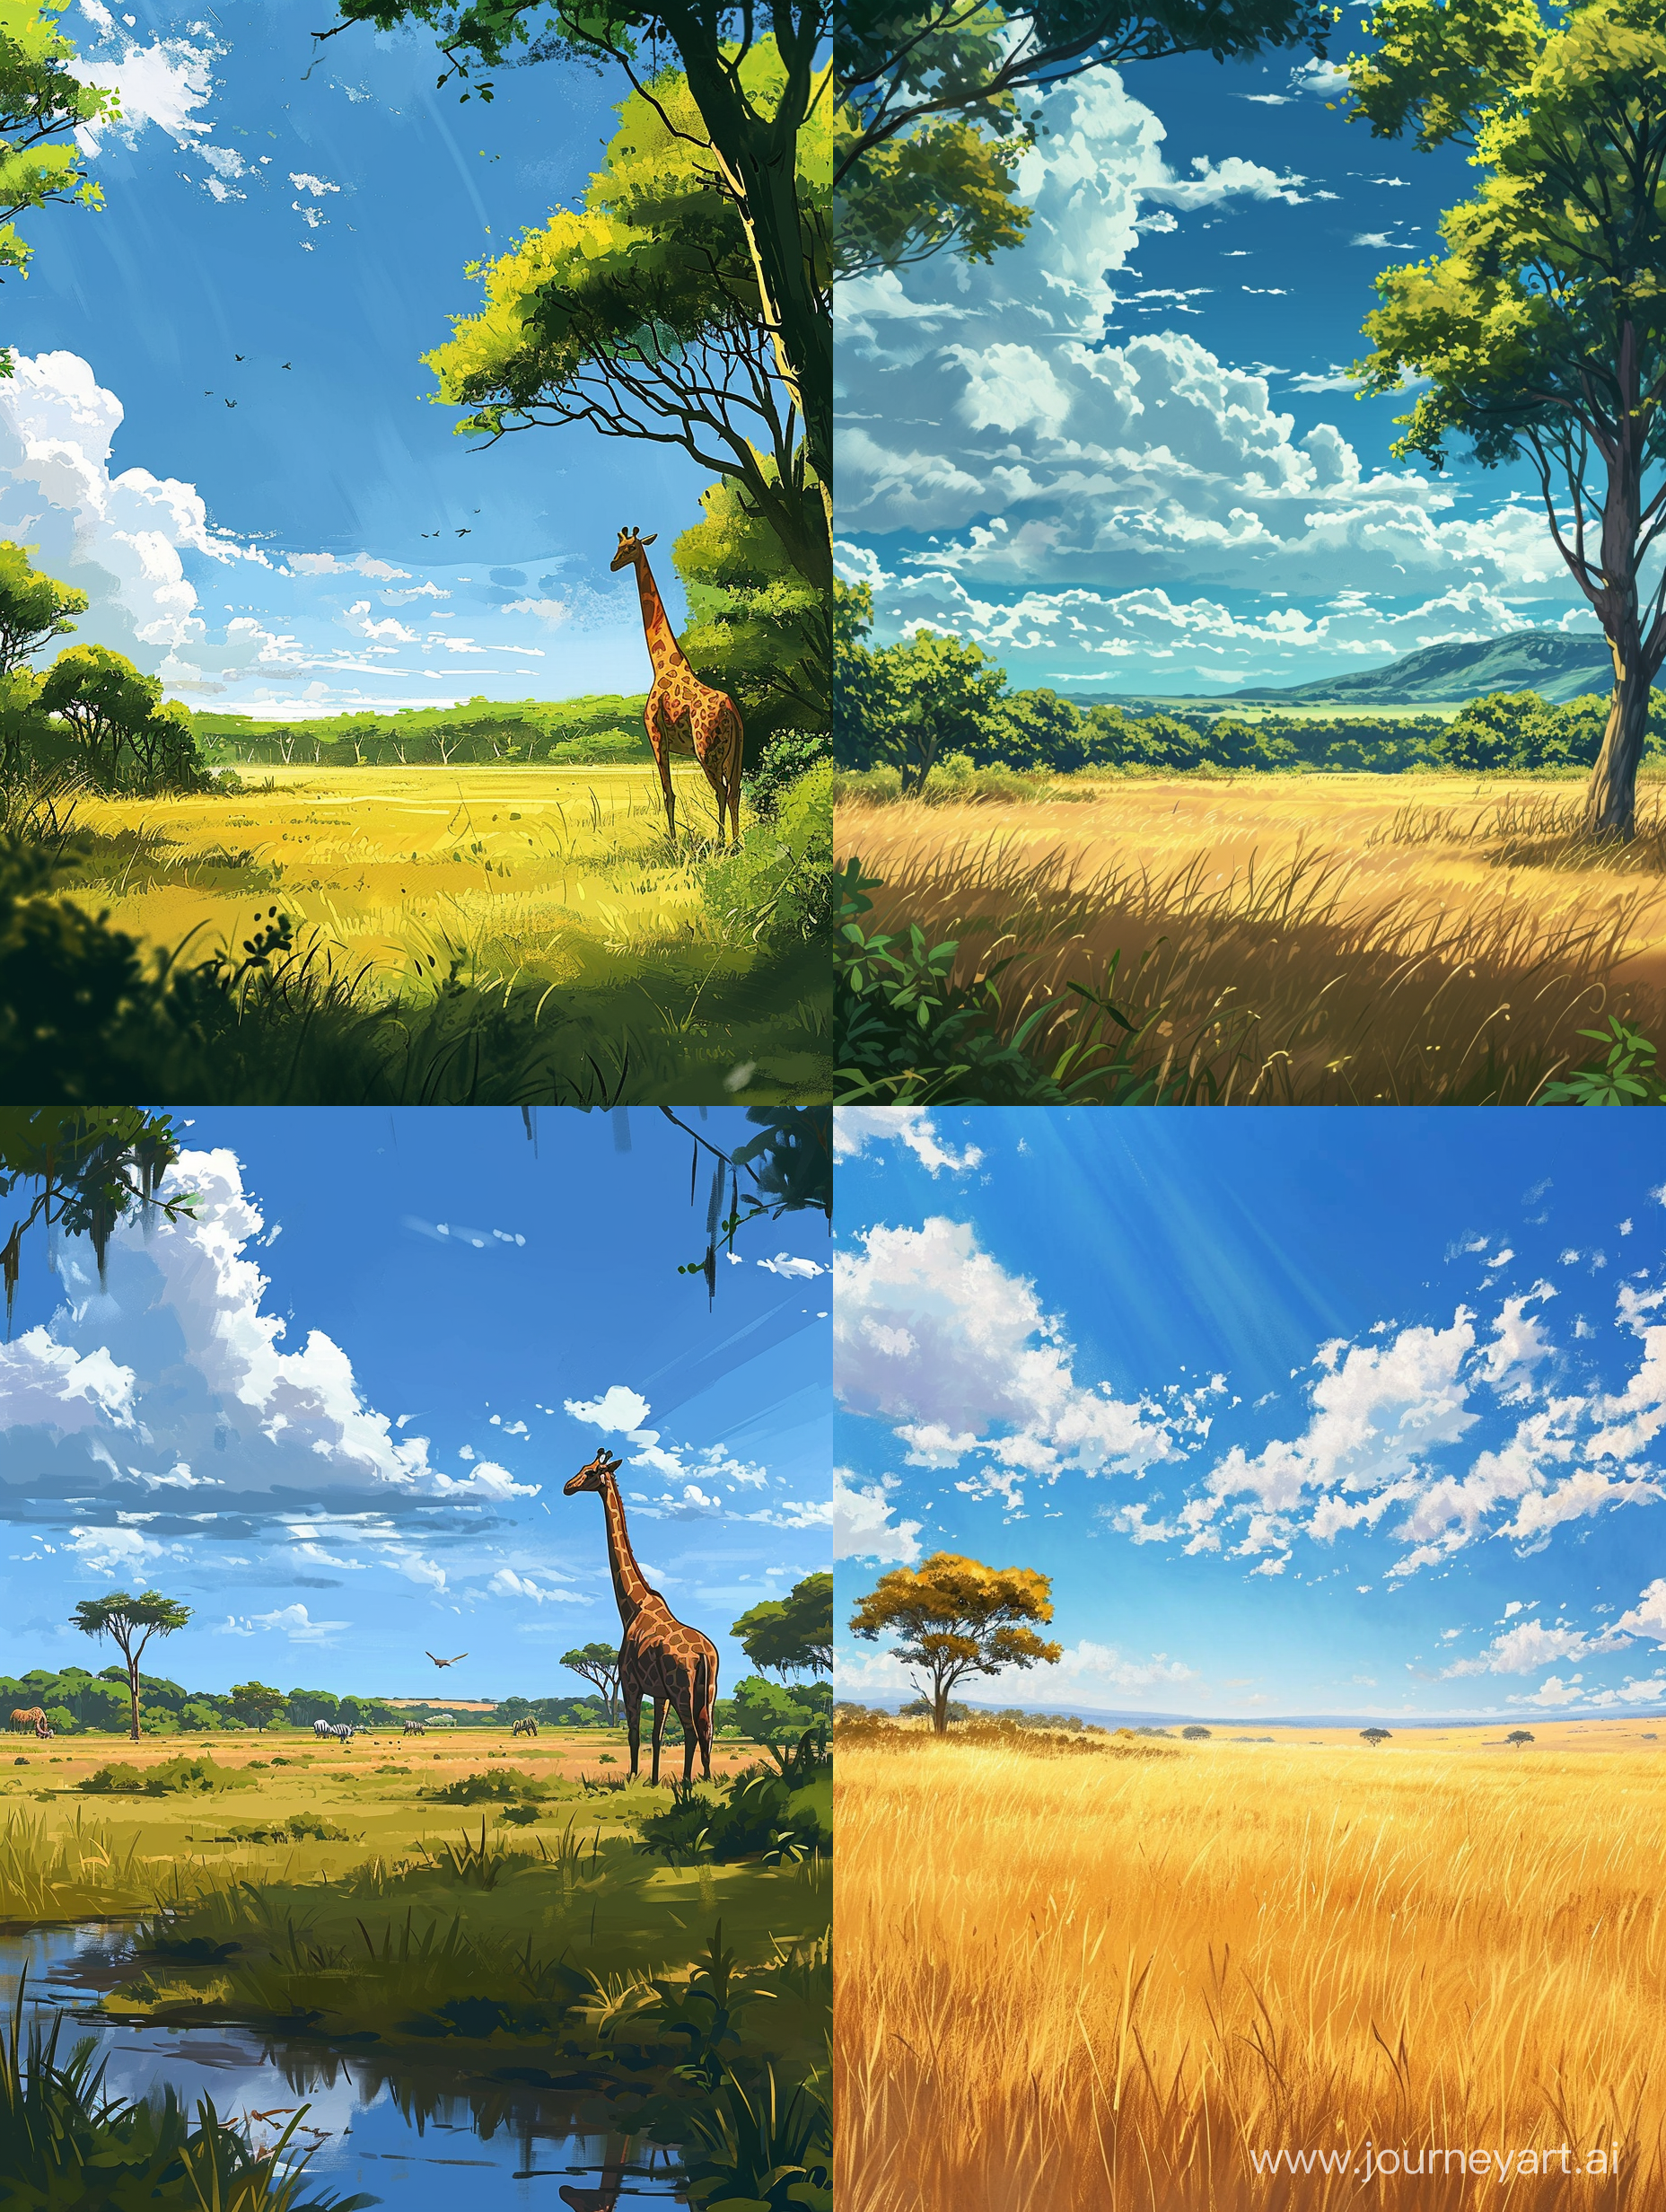 A picture of a savannah by Studio Ghibli Art Style